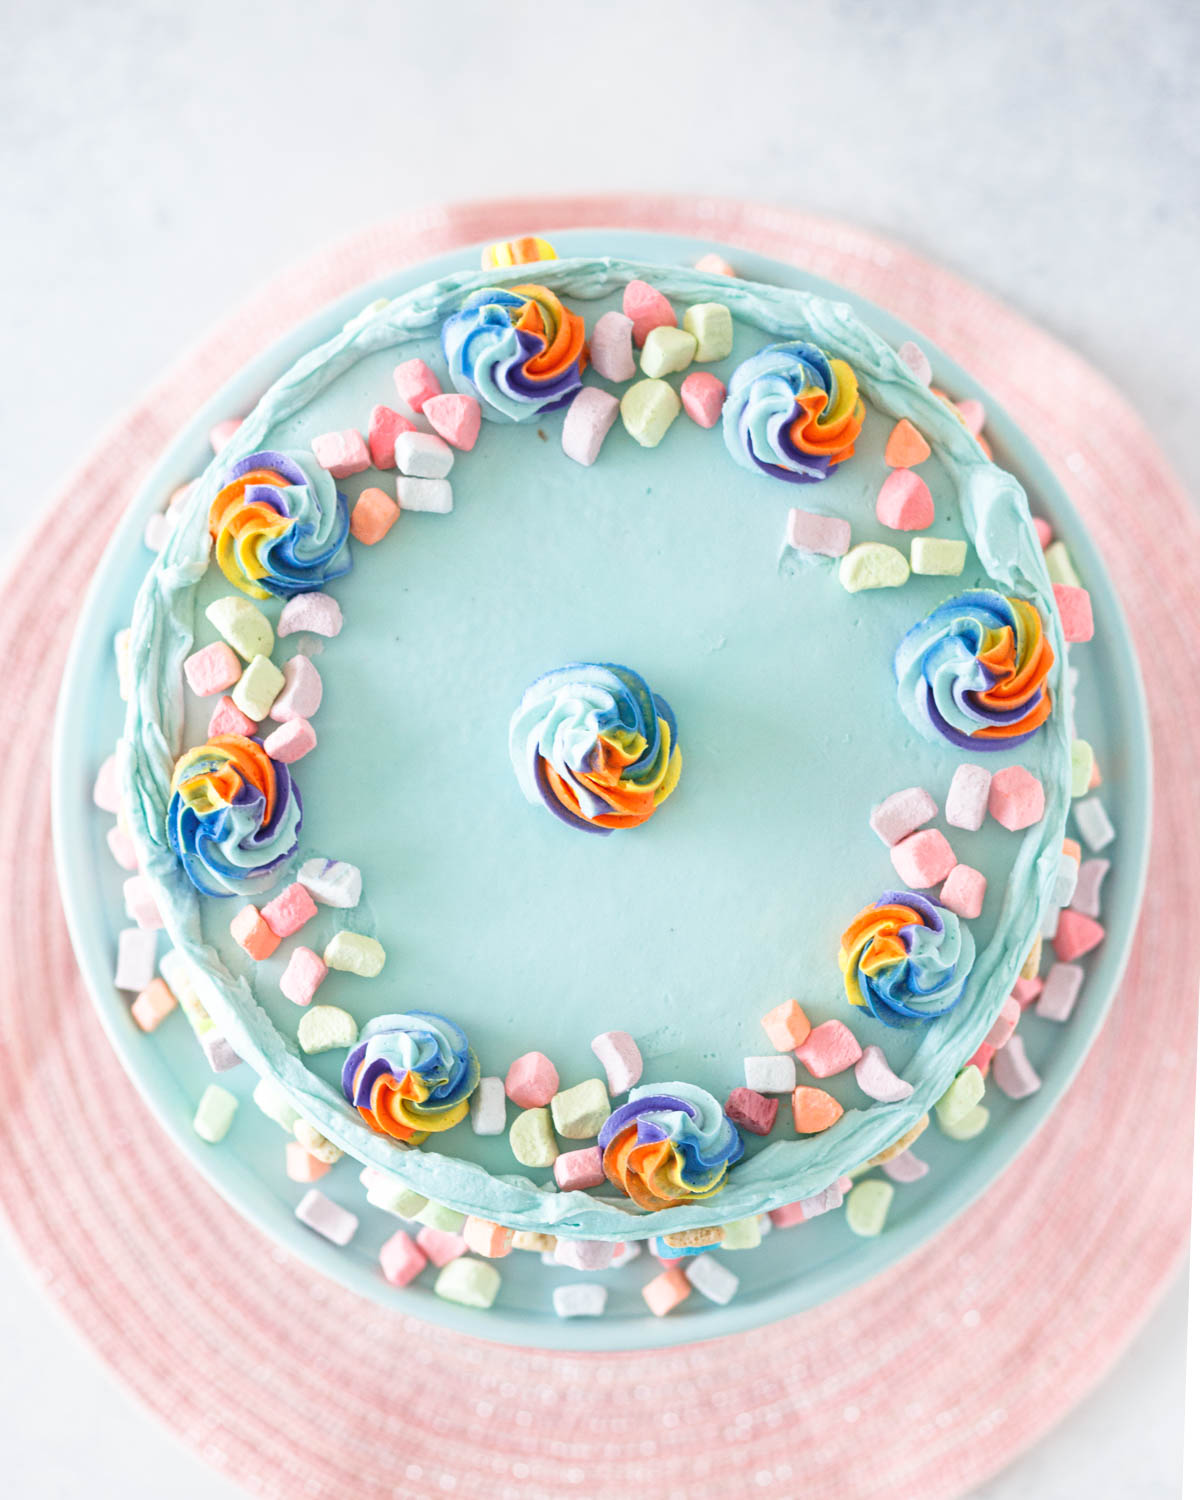 cake top view. The top of the cake is decorated with multicolored swirls and a ring of dehydrated marshmallows.